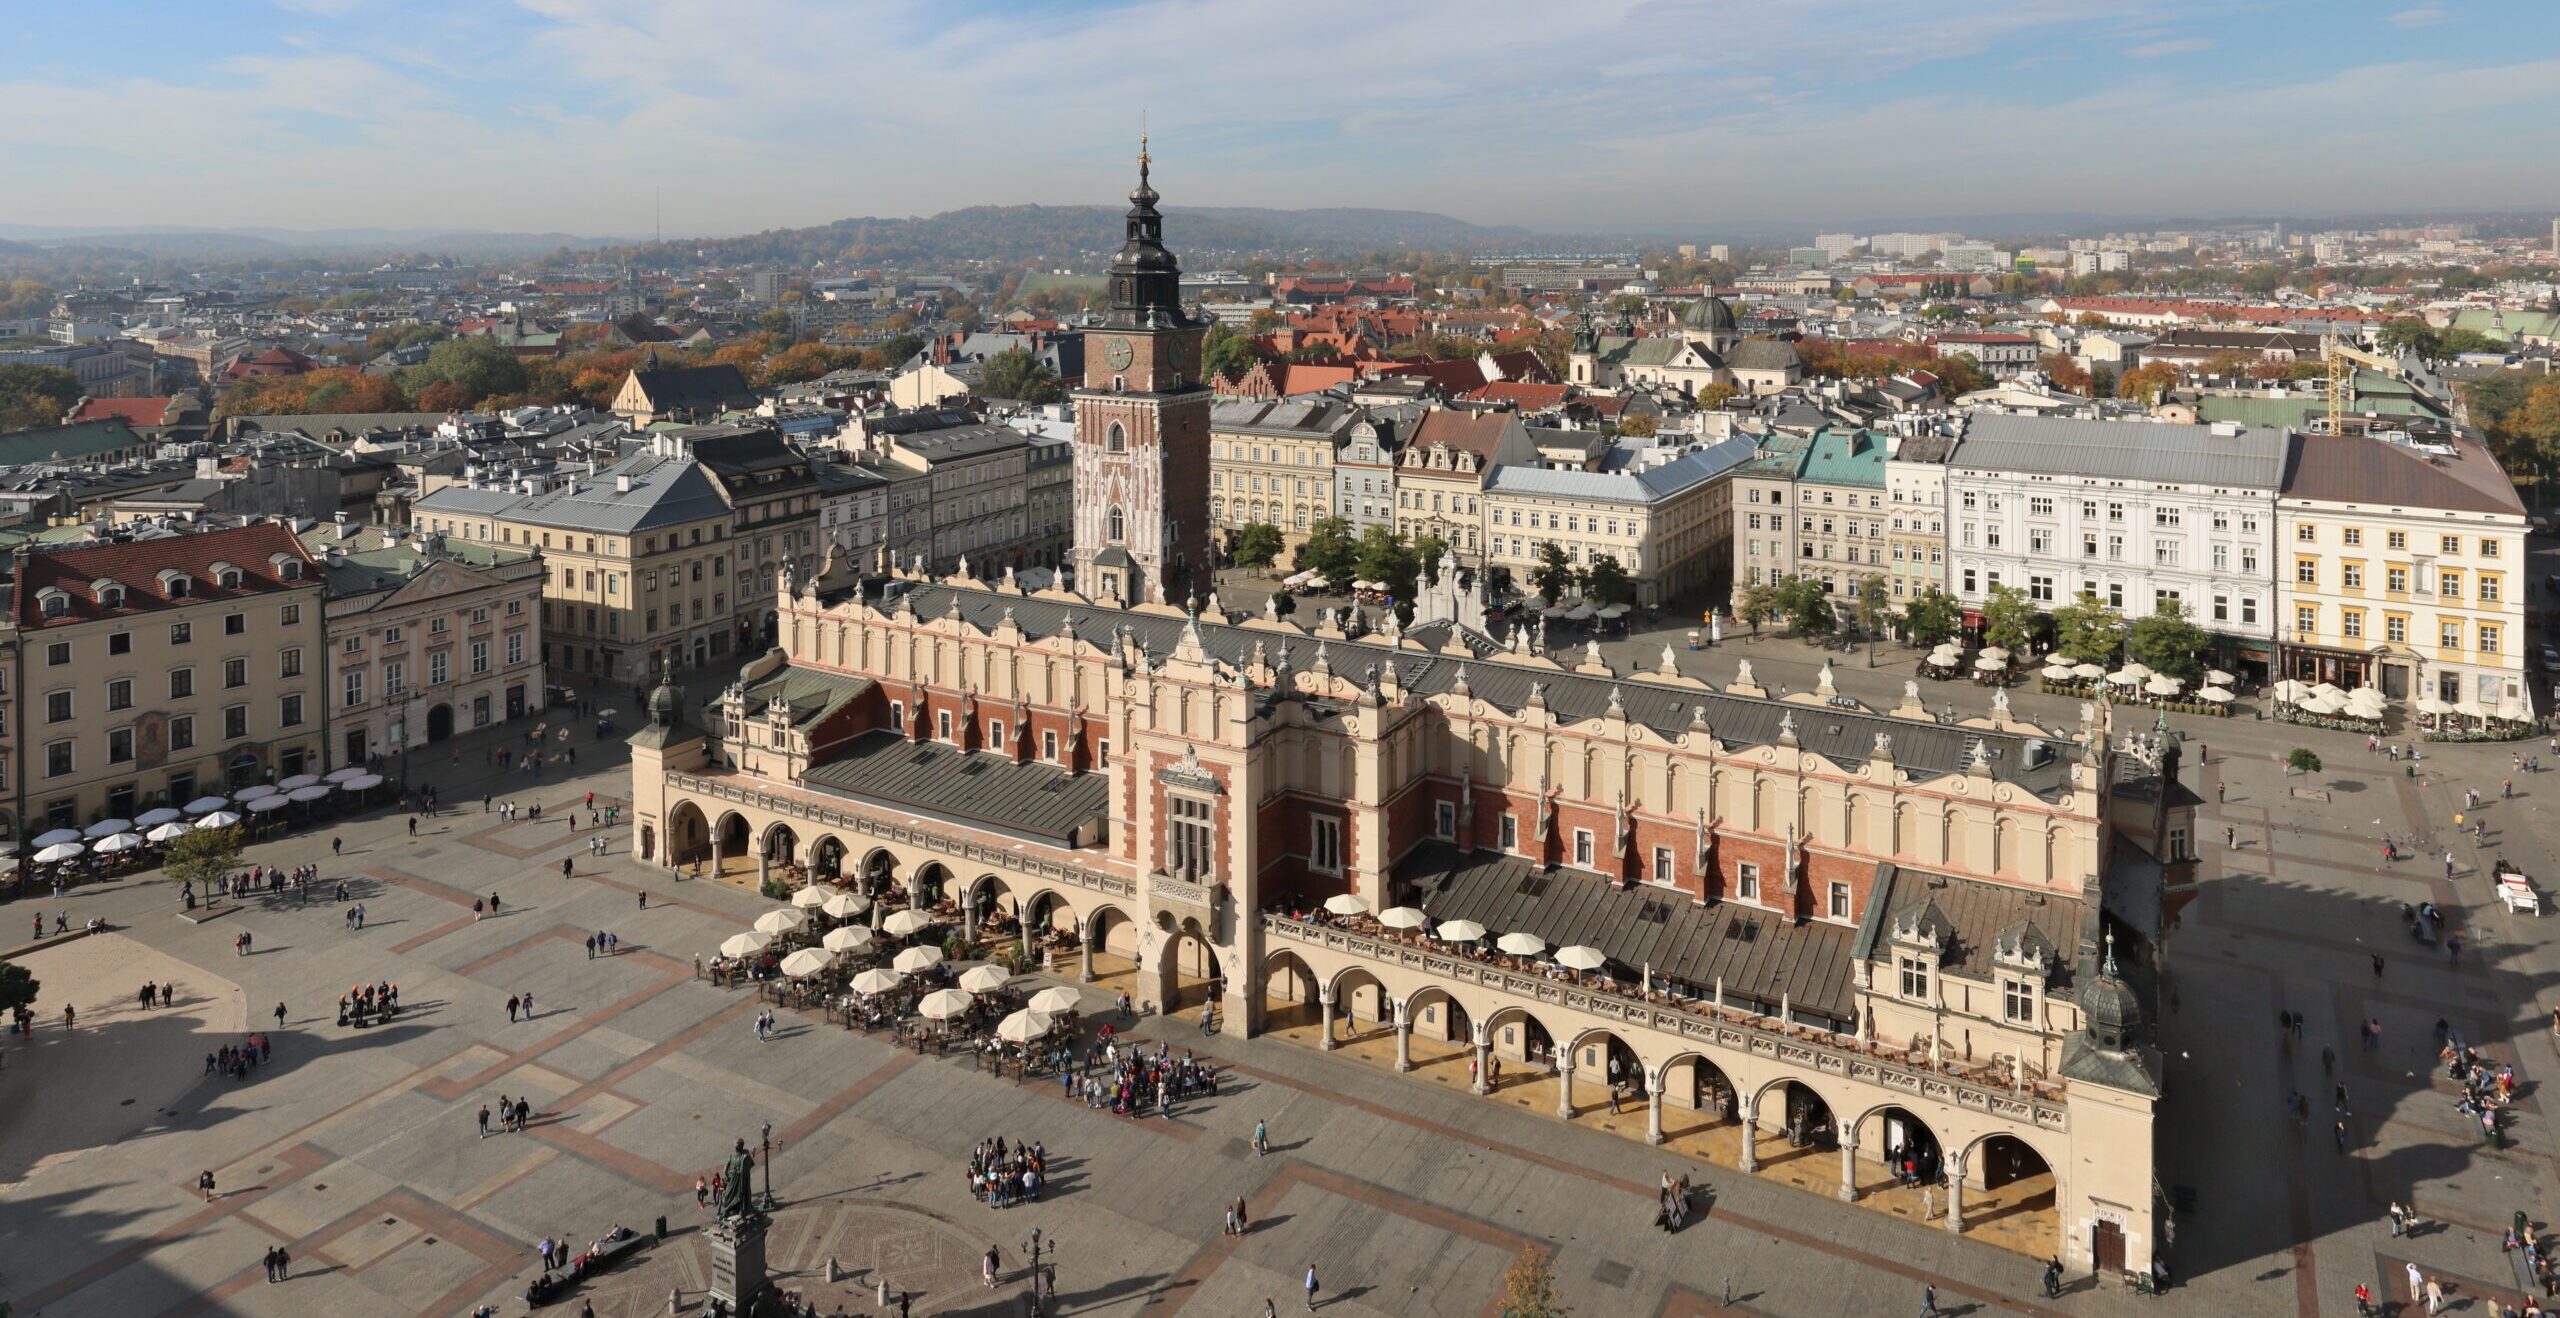 Krakow: Cloth Hall from tower of St. Mary Basilica. Picture by Ingo Mehling
Ev: 14,35